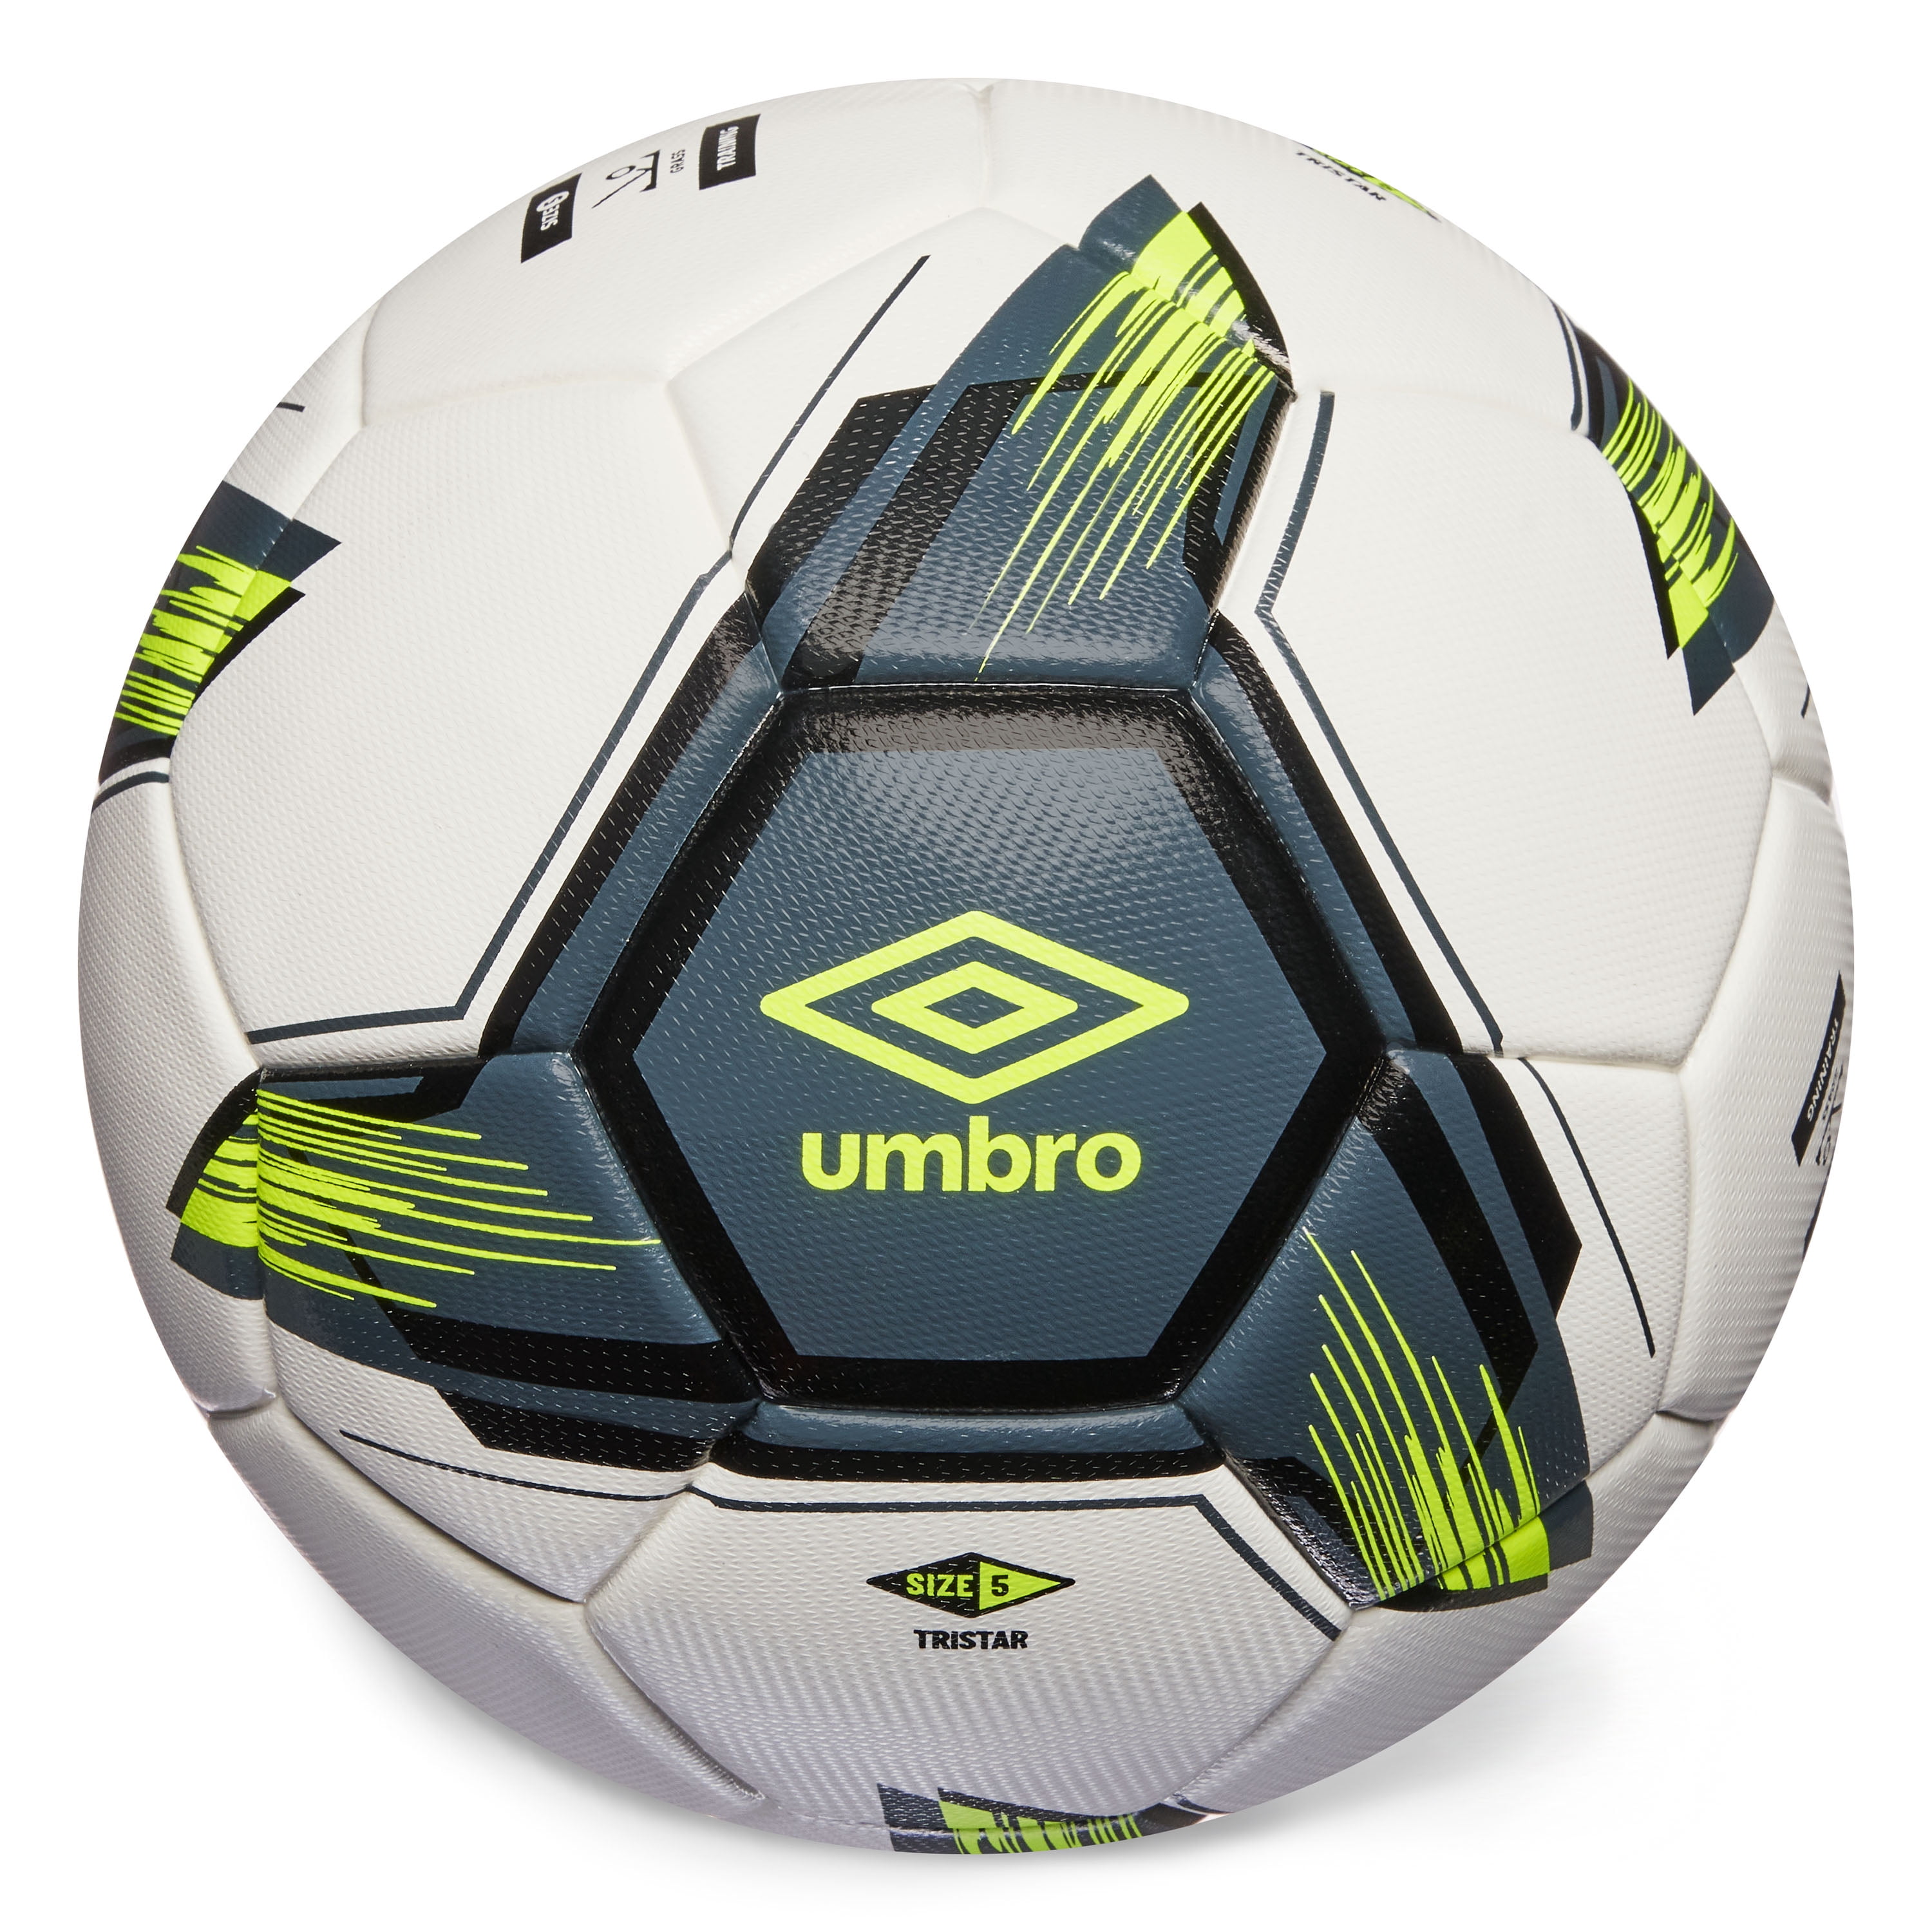 New Umbro White Soccer Ball Checkered Pattern FIFA Quality Size 5 